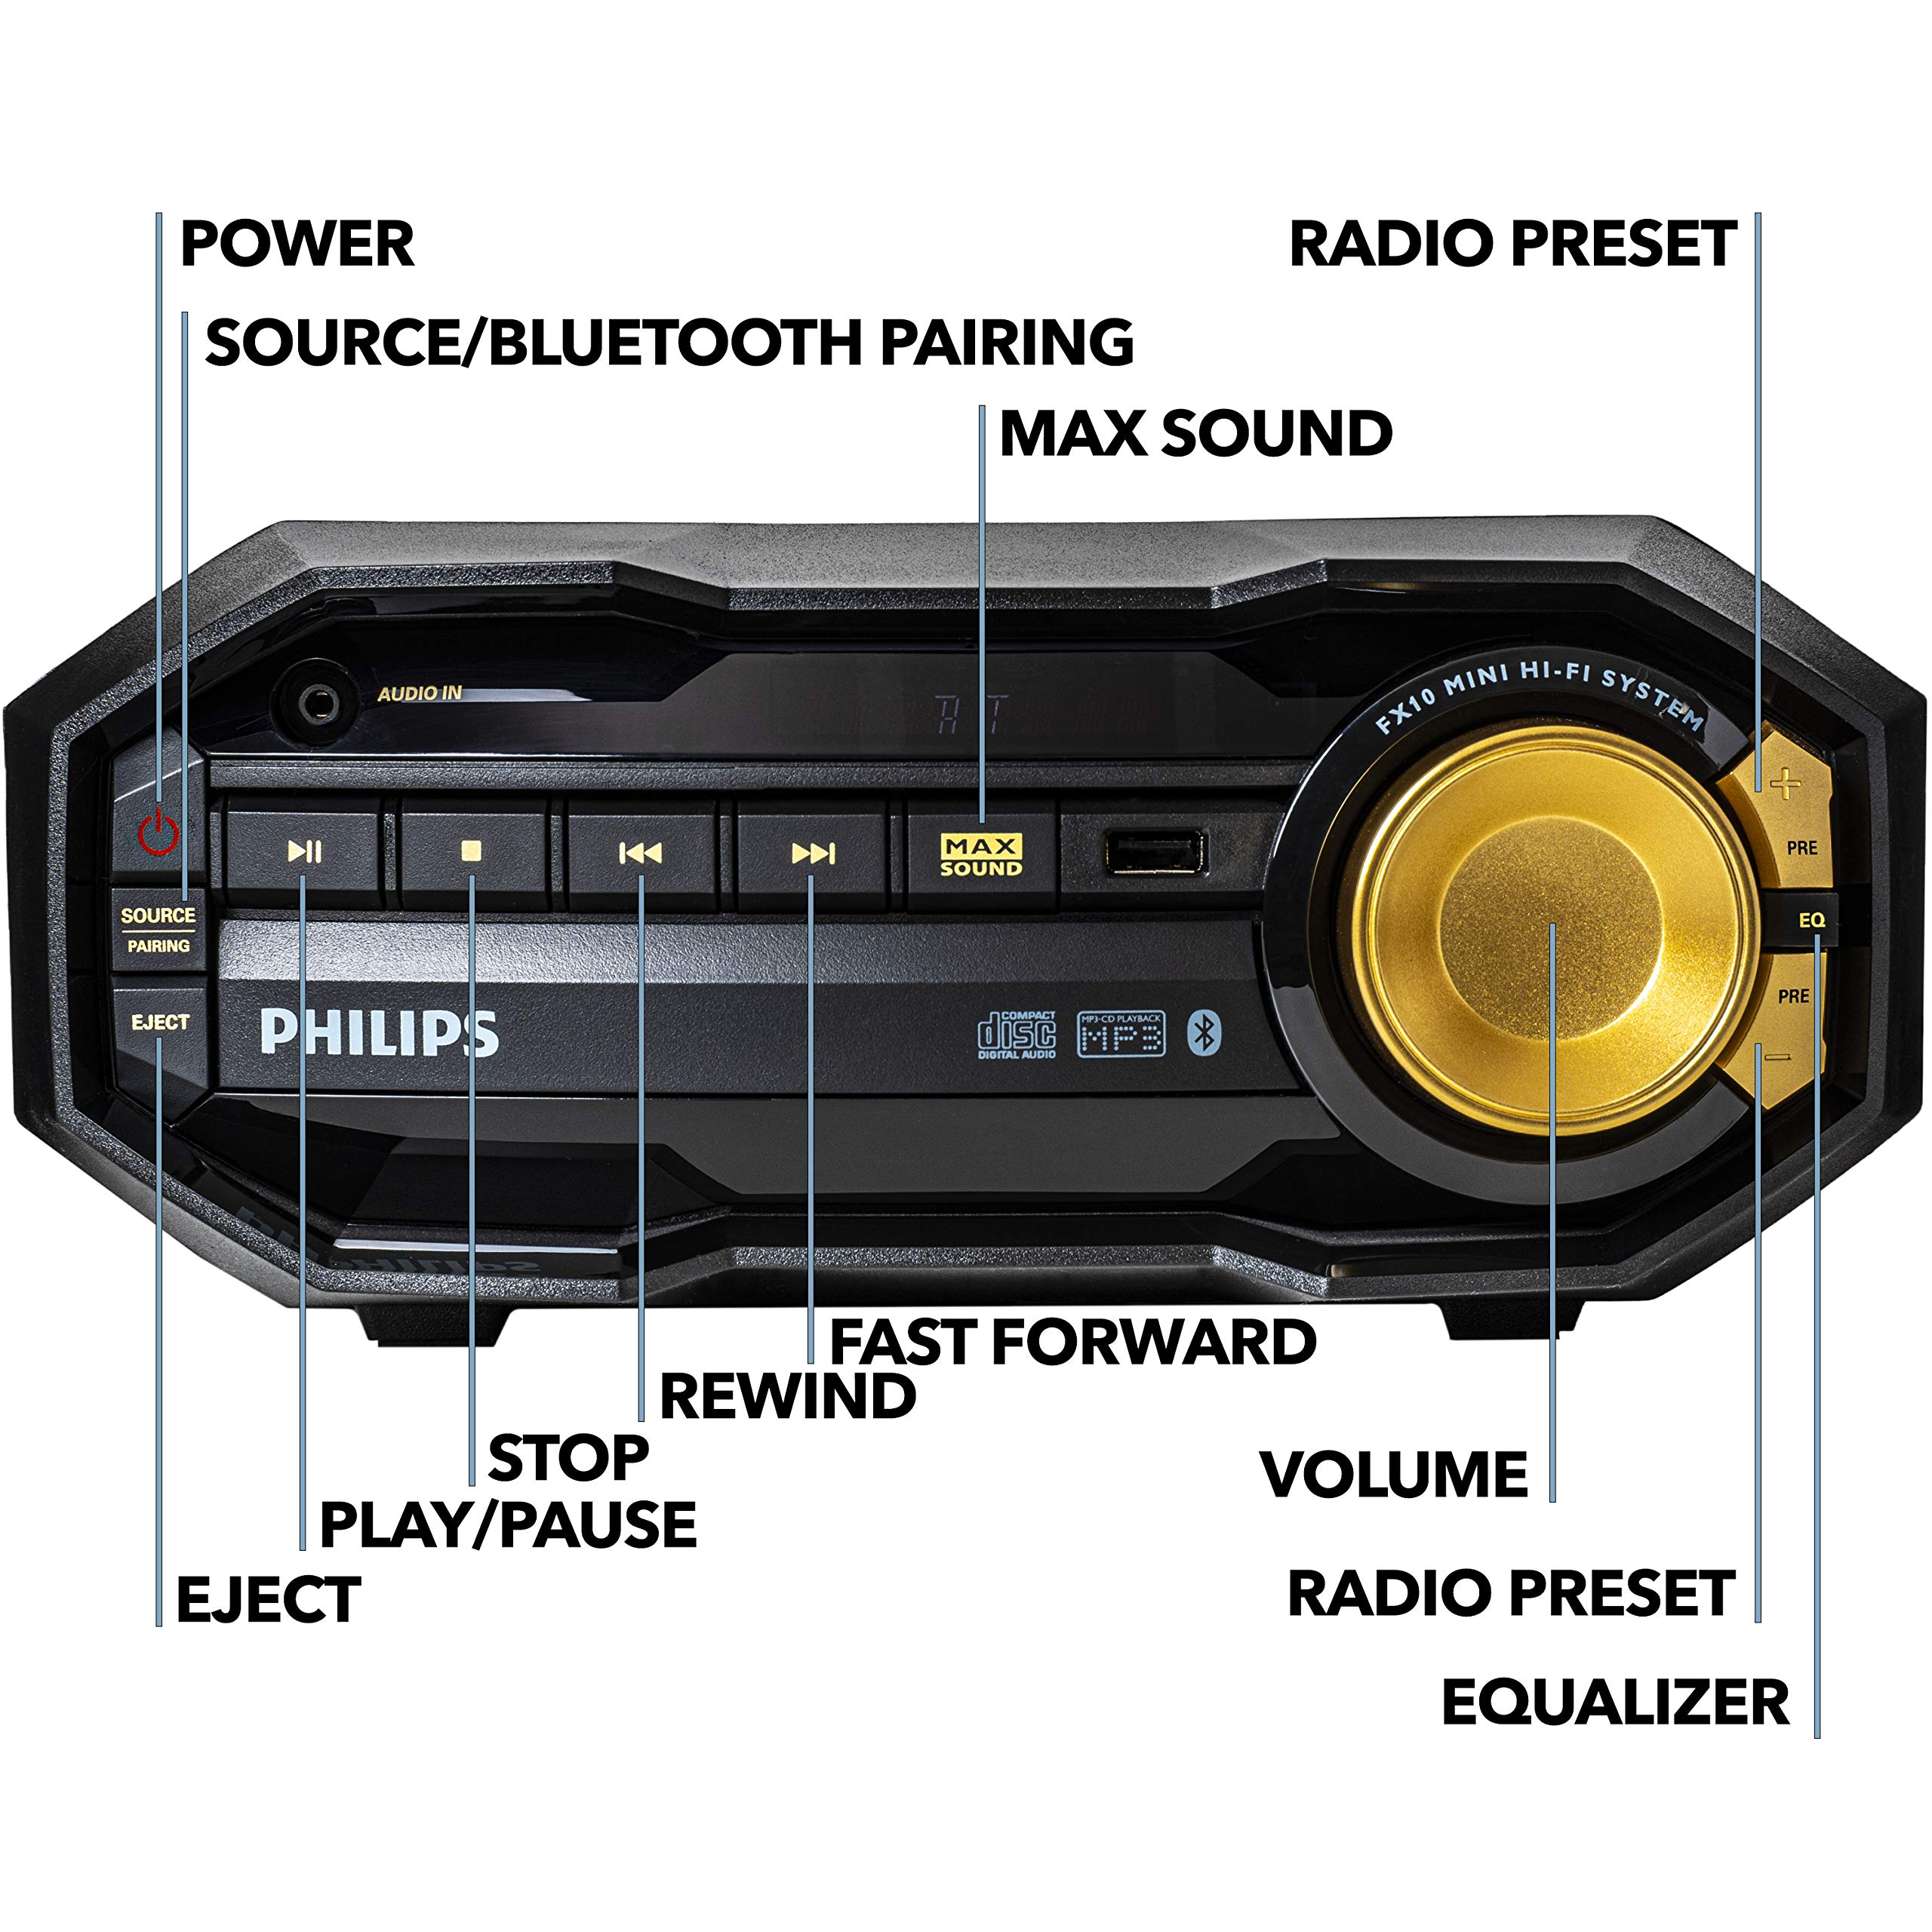 PHILIPS FX10 Bluetooth Stereo System for Home with CD Player , MP3, USB, FM Radio, Bass Reflex Speaker, 230 W, Remote Control Included